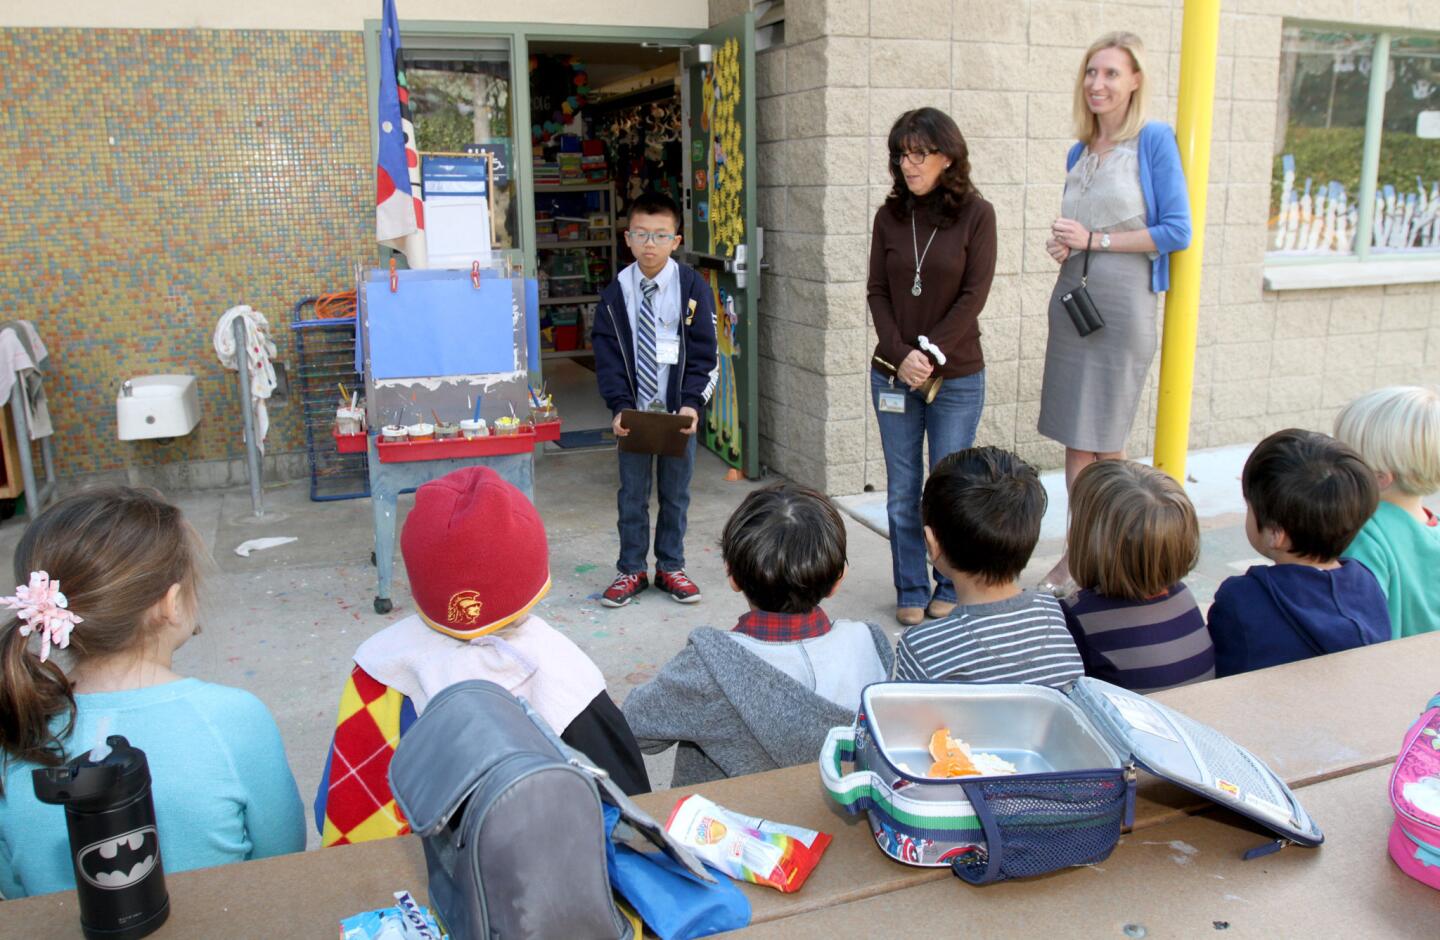 With La Cañada Elementary School transitional Kindergarten teacher Pam Daniger, second from right, and Principal Emily Blaney looking on, fifth-grader Michael Kwan, the principal for a day, explains the virtues of picking up trash and leaving the school eating area clean to fellow students.